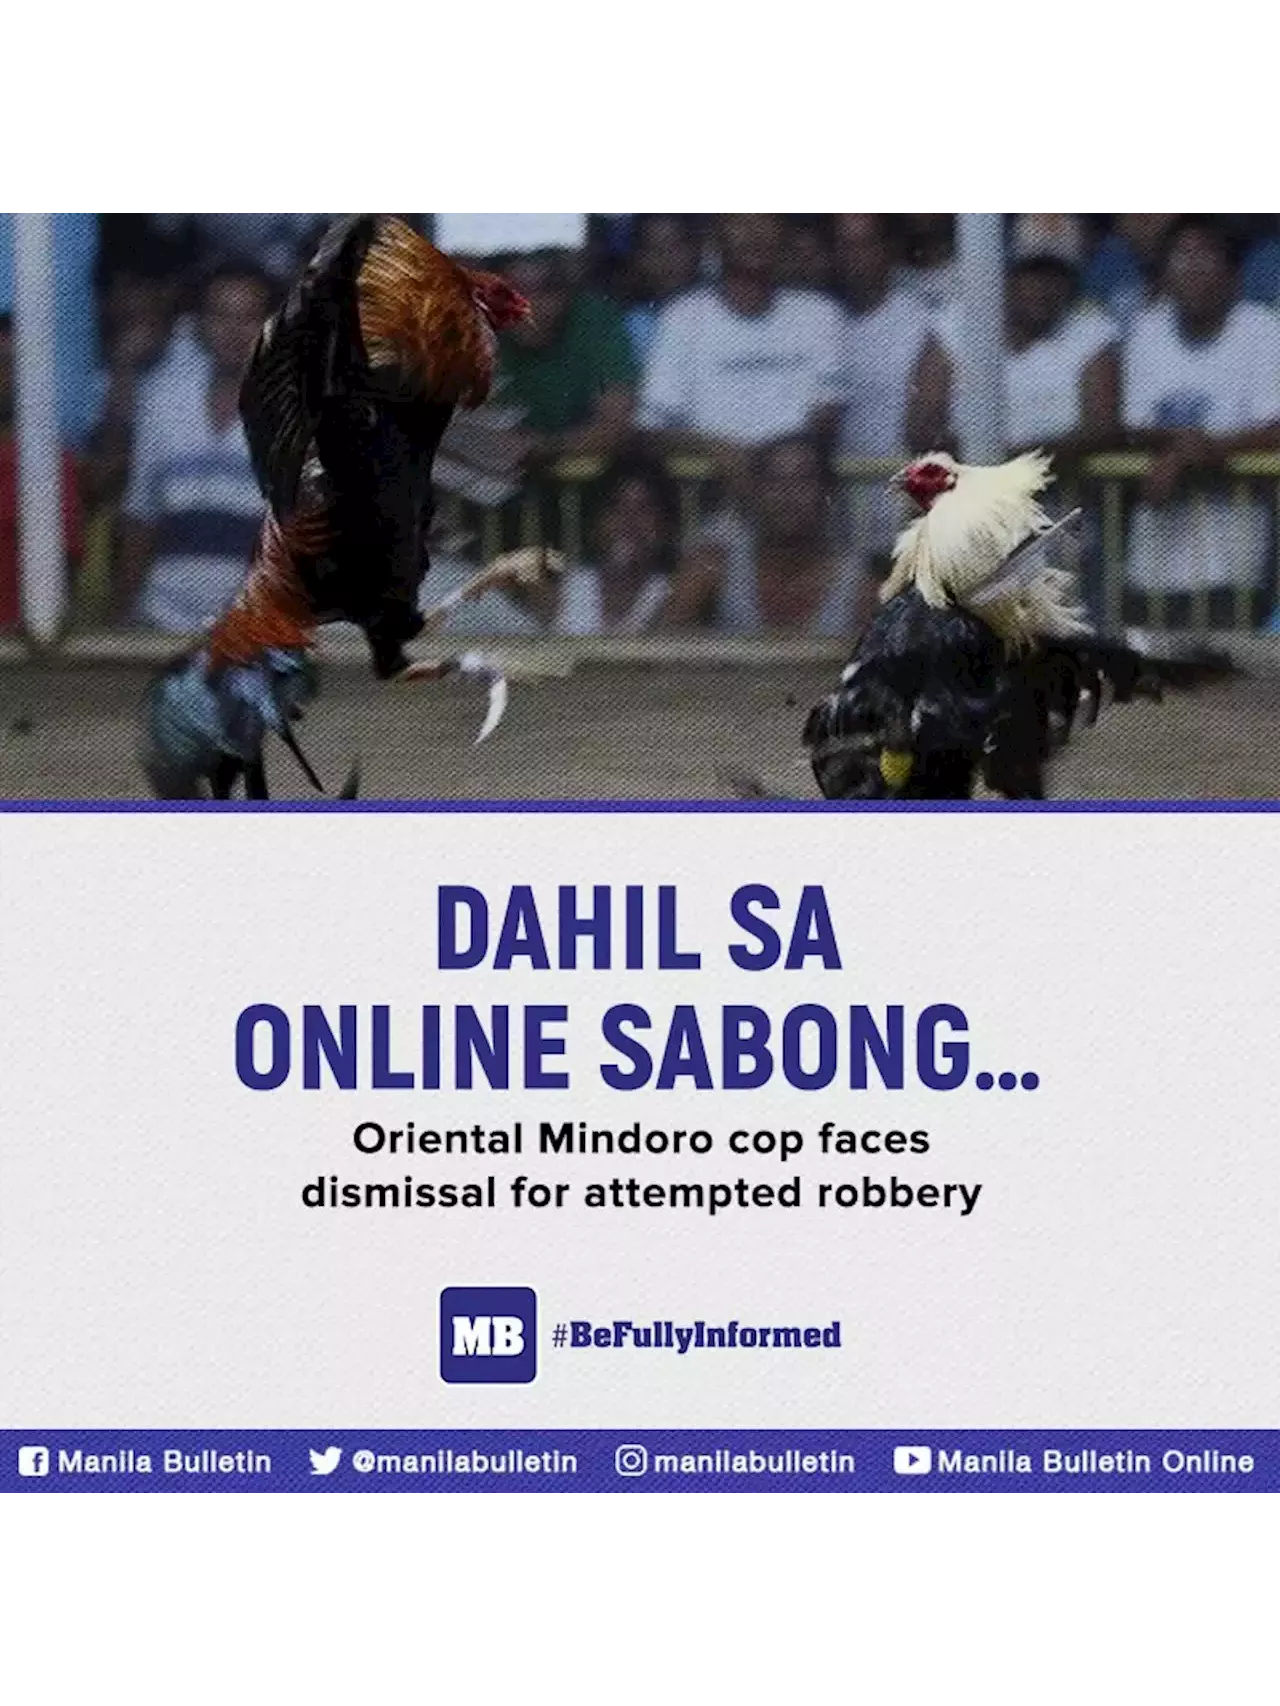 Cop Faces Dismissal For Robbery Try Allegedly Over Online Sabong Addiction